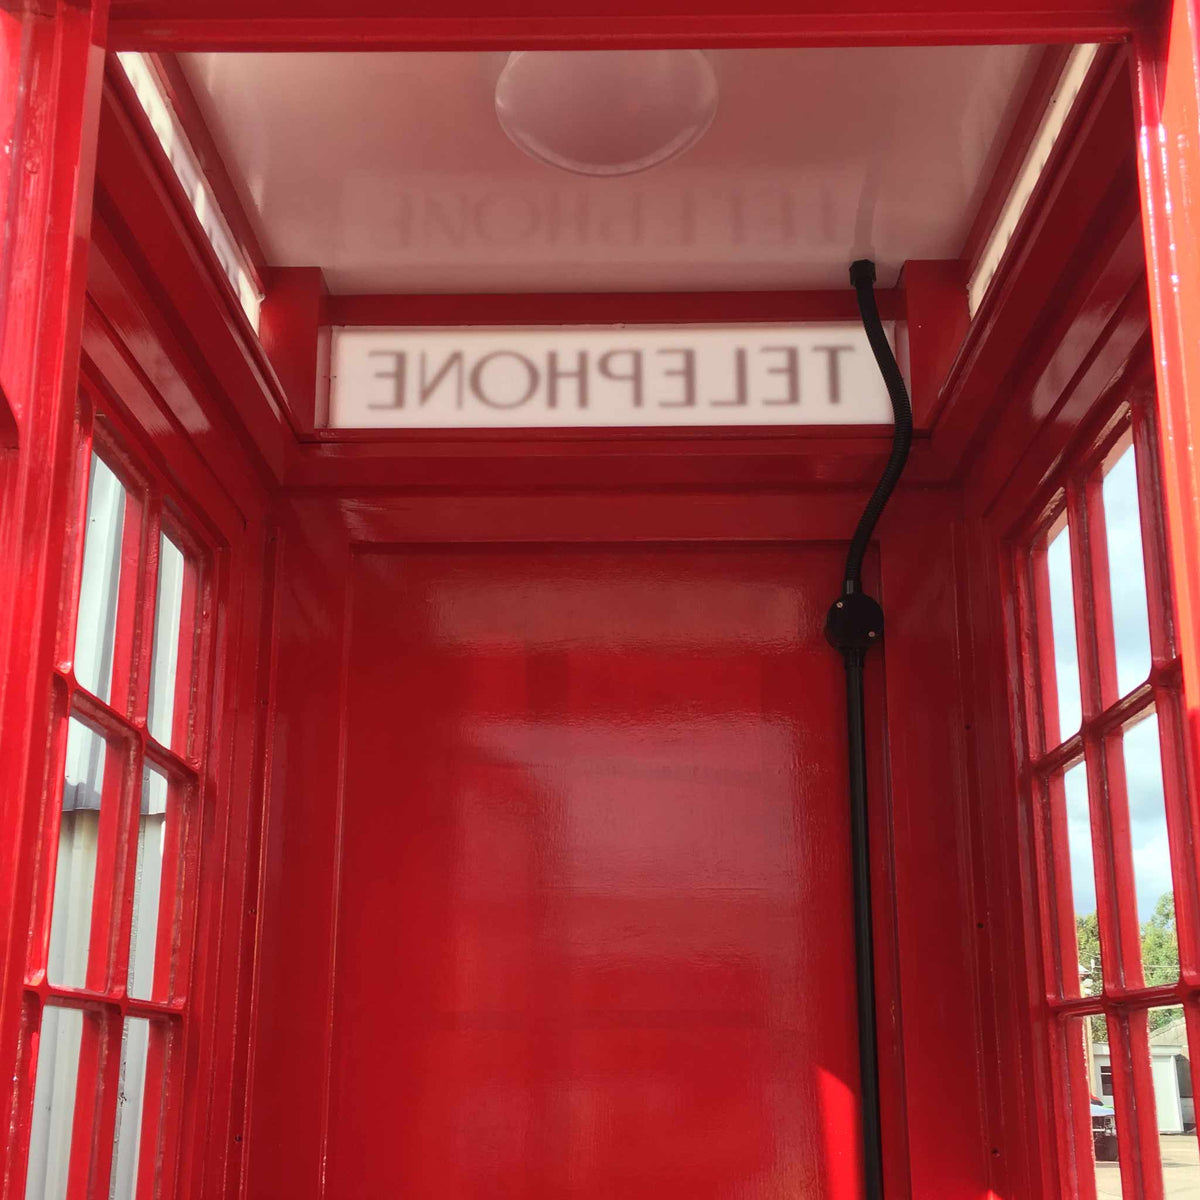 British Red Telephone Boxes - For Sale - Traditional Red Colour - Inside View - Replica Phone boxes made to order - Warden&#39;s Crafts &amp; Creations